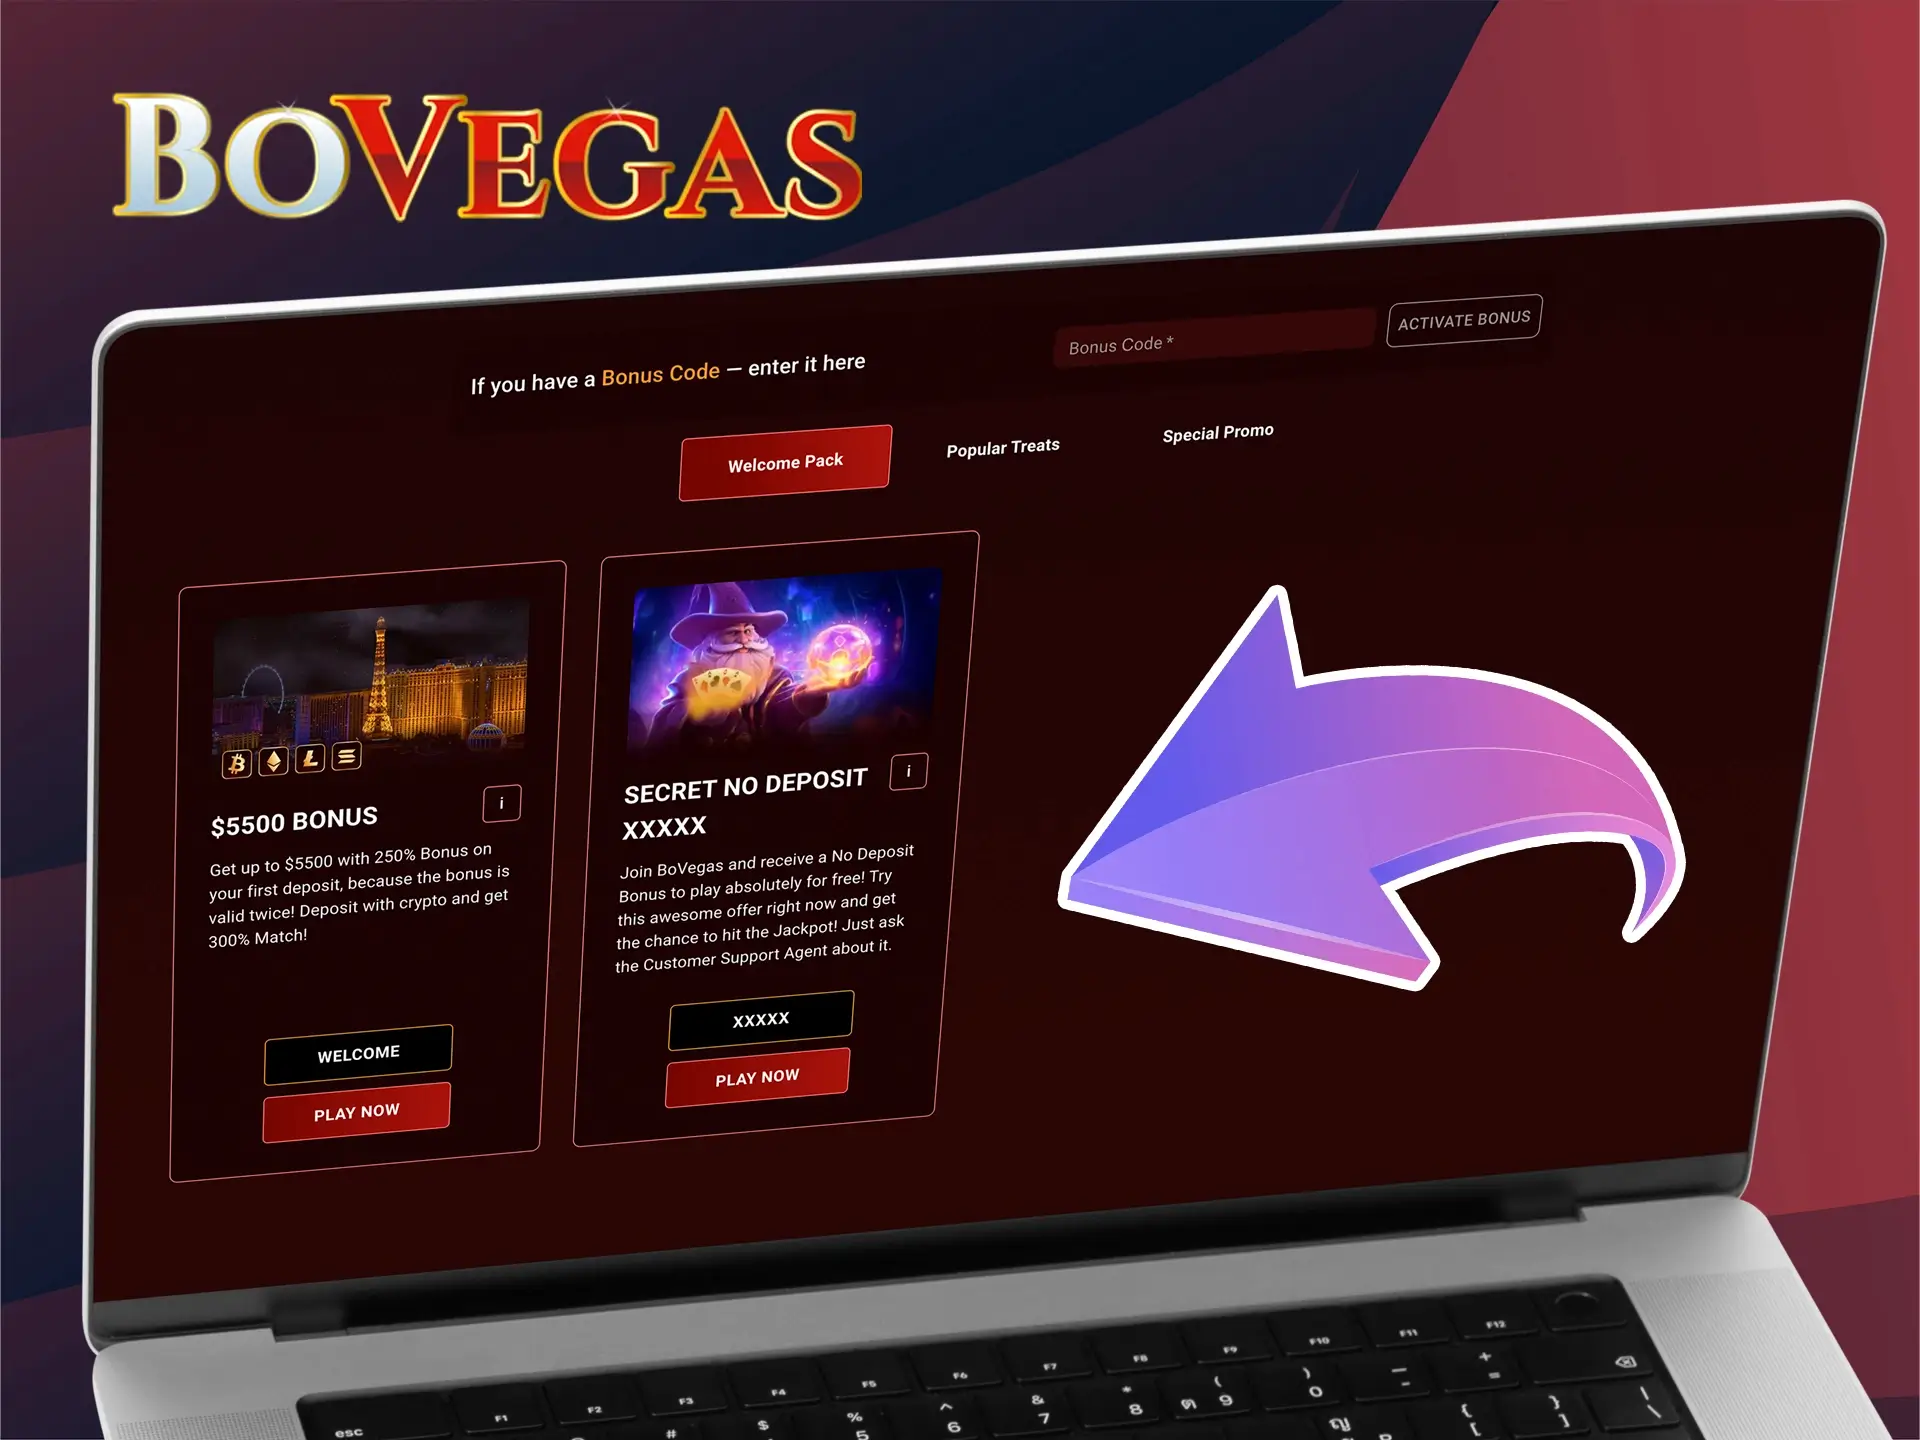 Go to your personal account to access your first and coveted bonus from BoVegas.